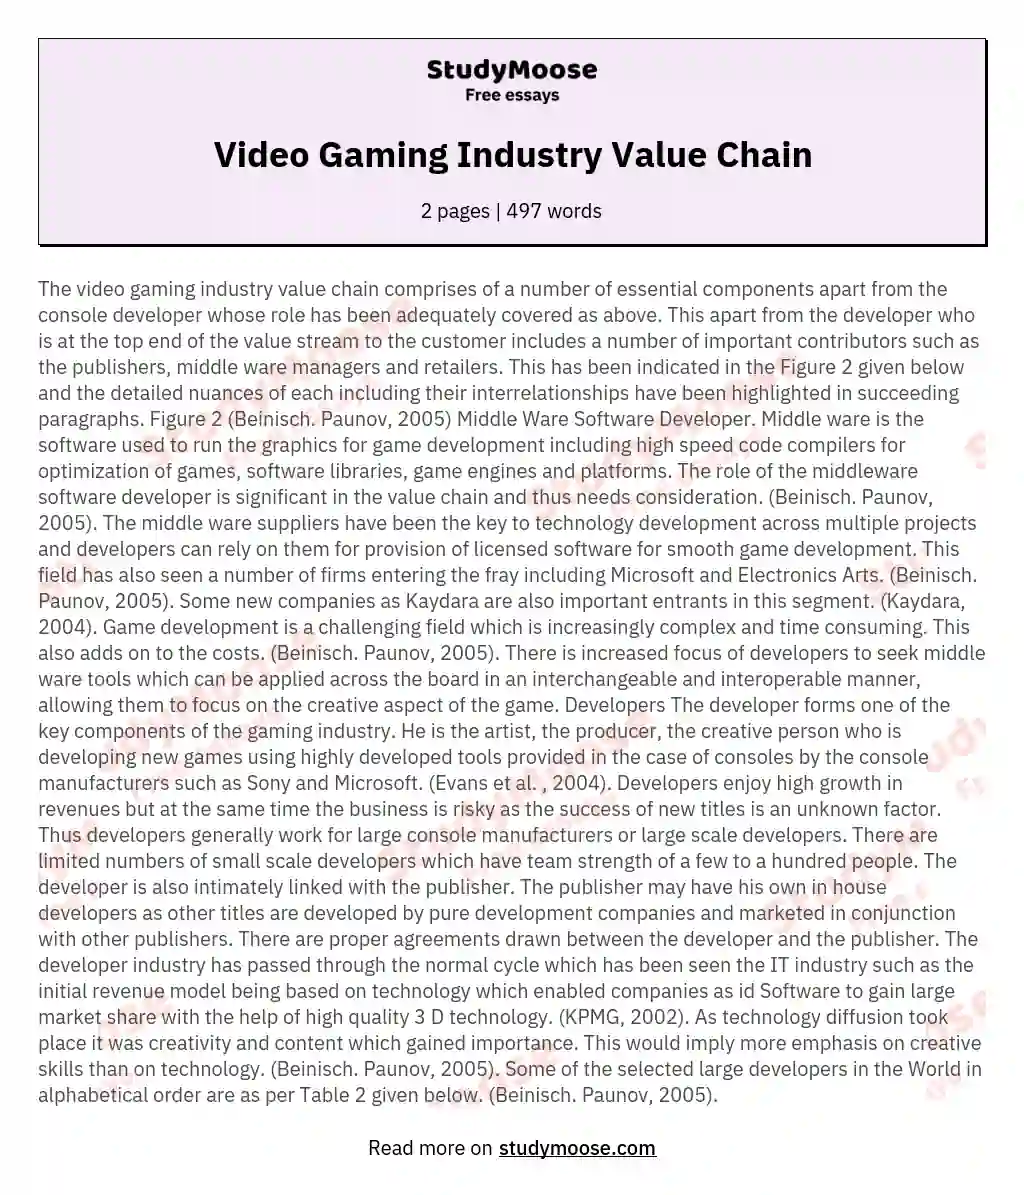 Video Gaming Industry Value Chain essay